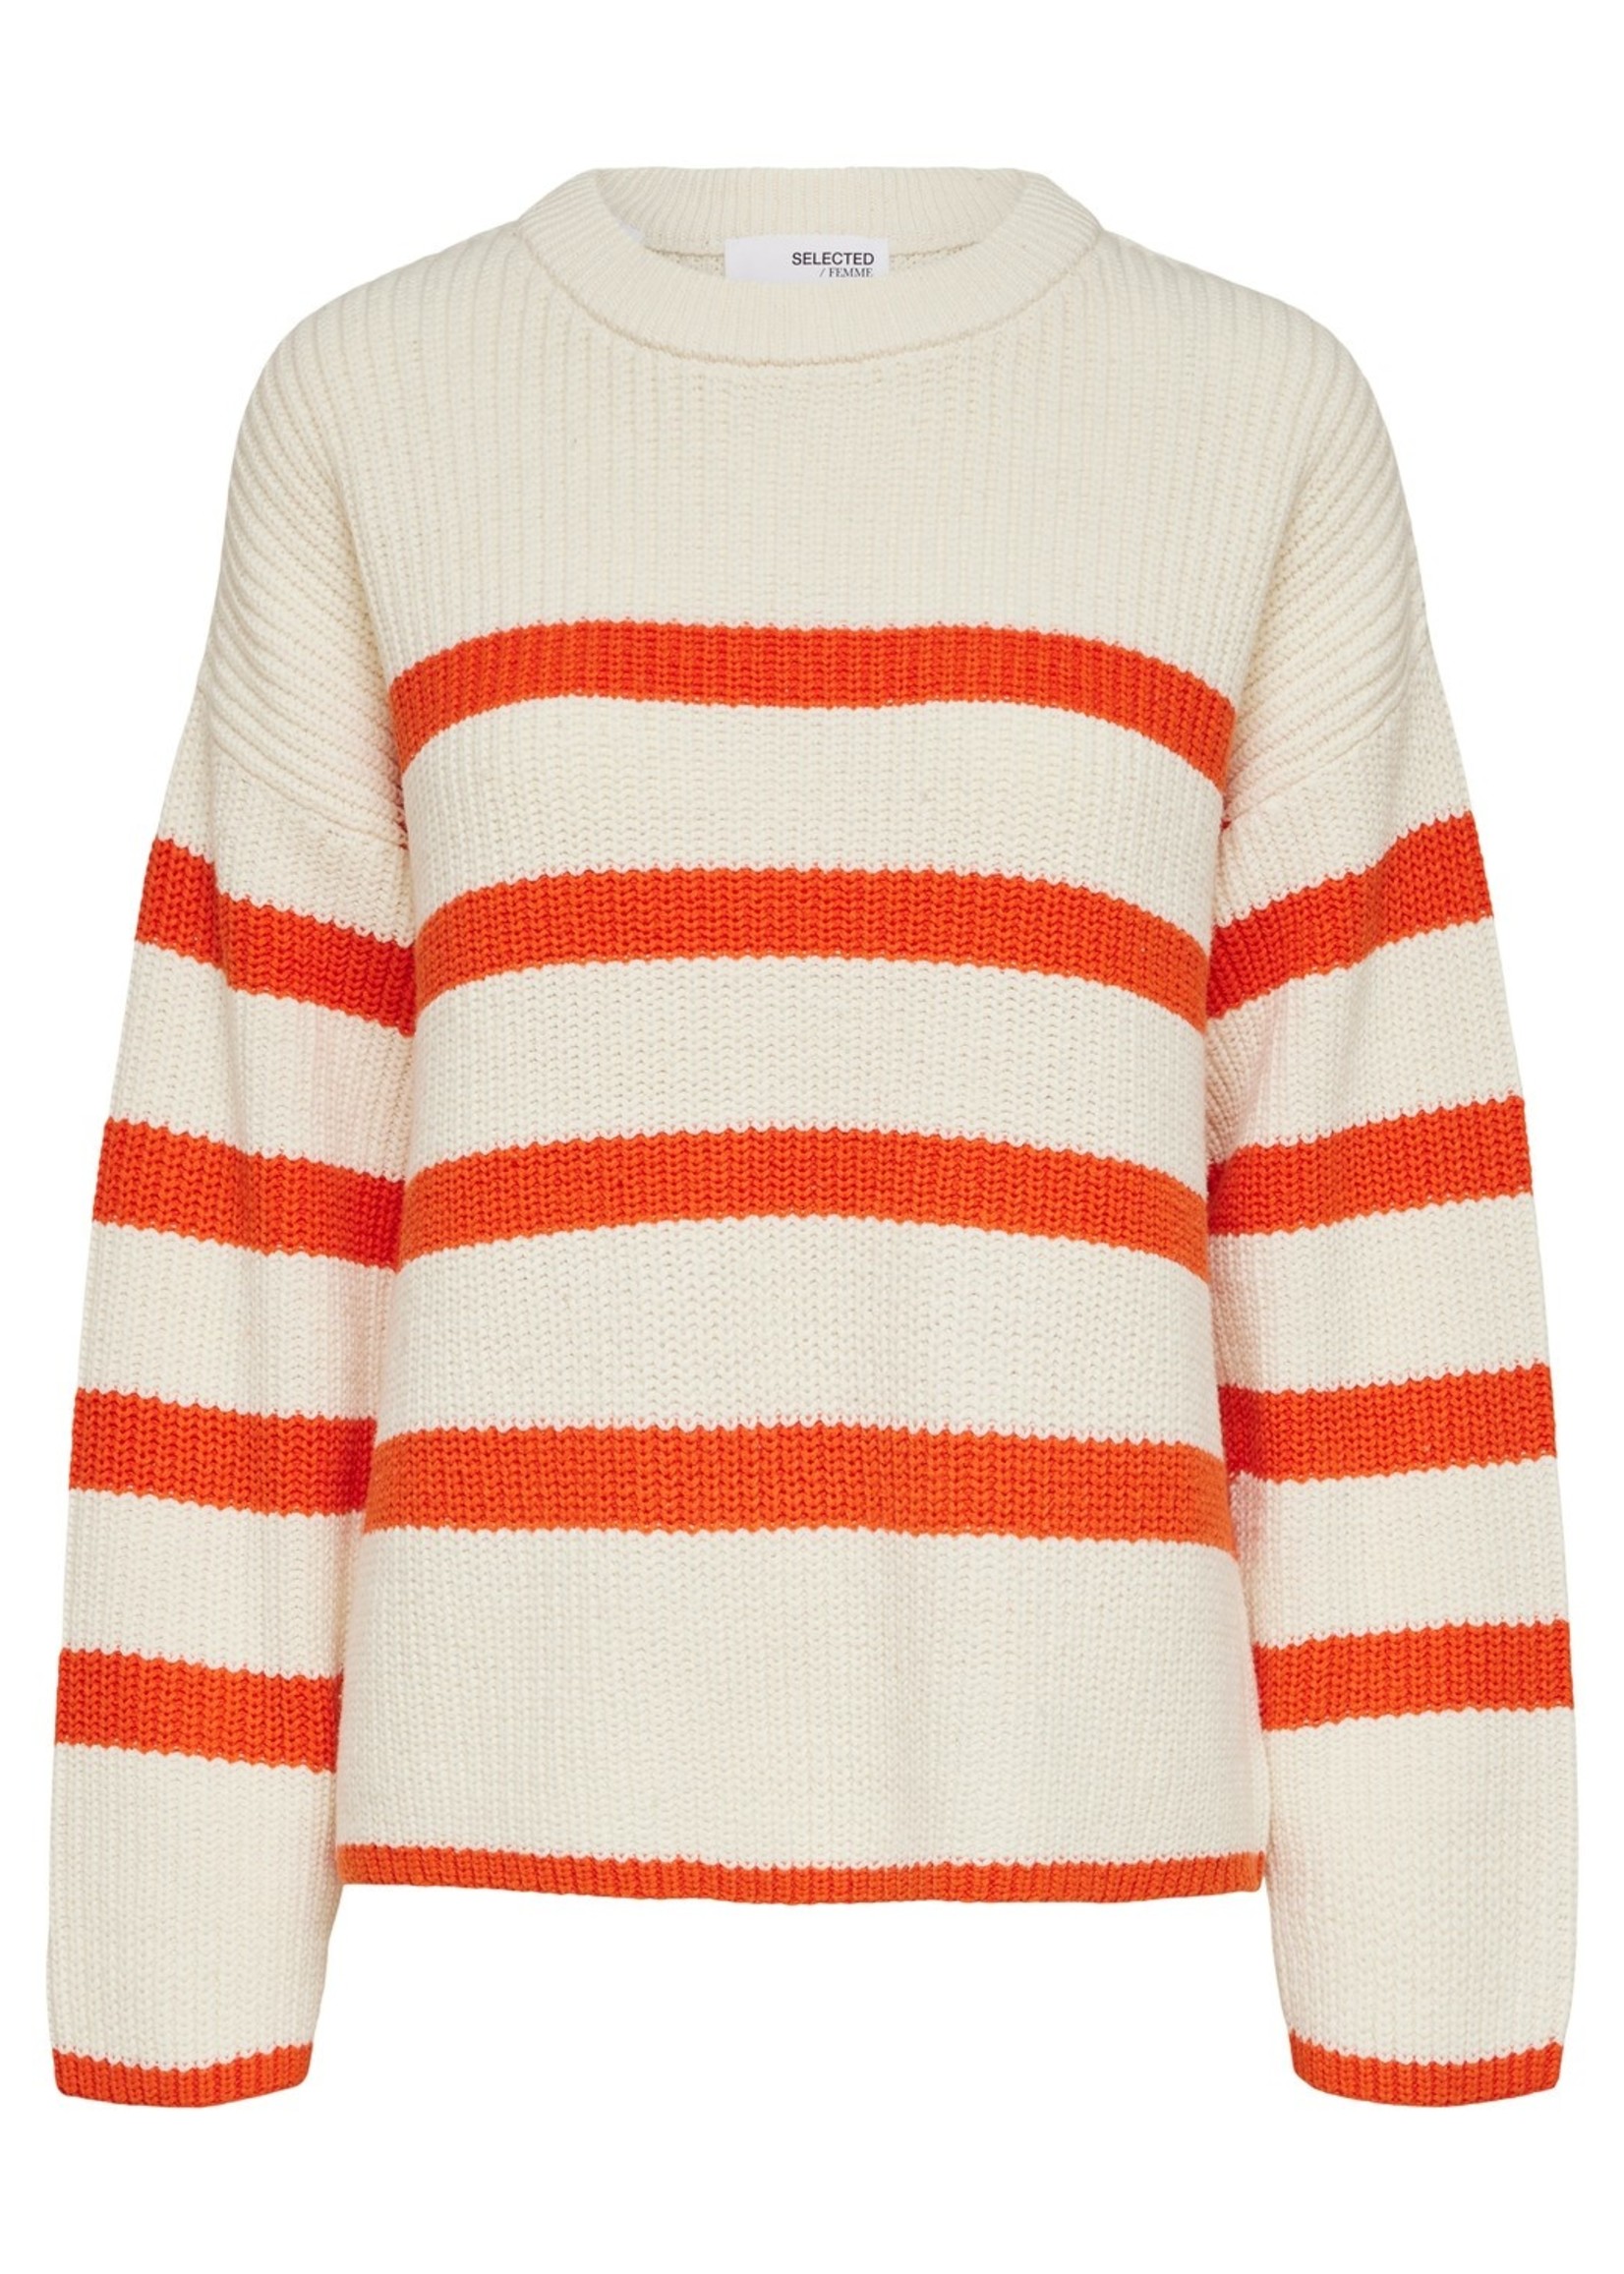 Selected Femme SLFBLOOMIE KNIT O-NECK SHOW WHITE/ORANGE